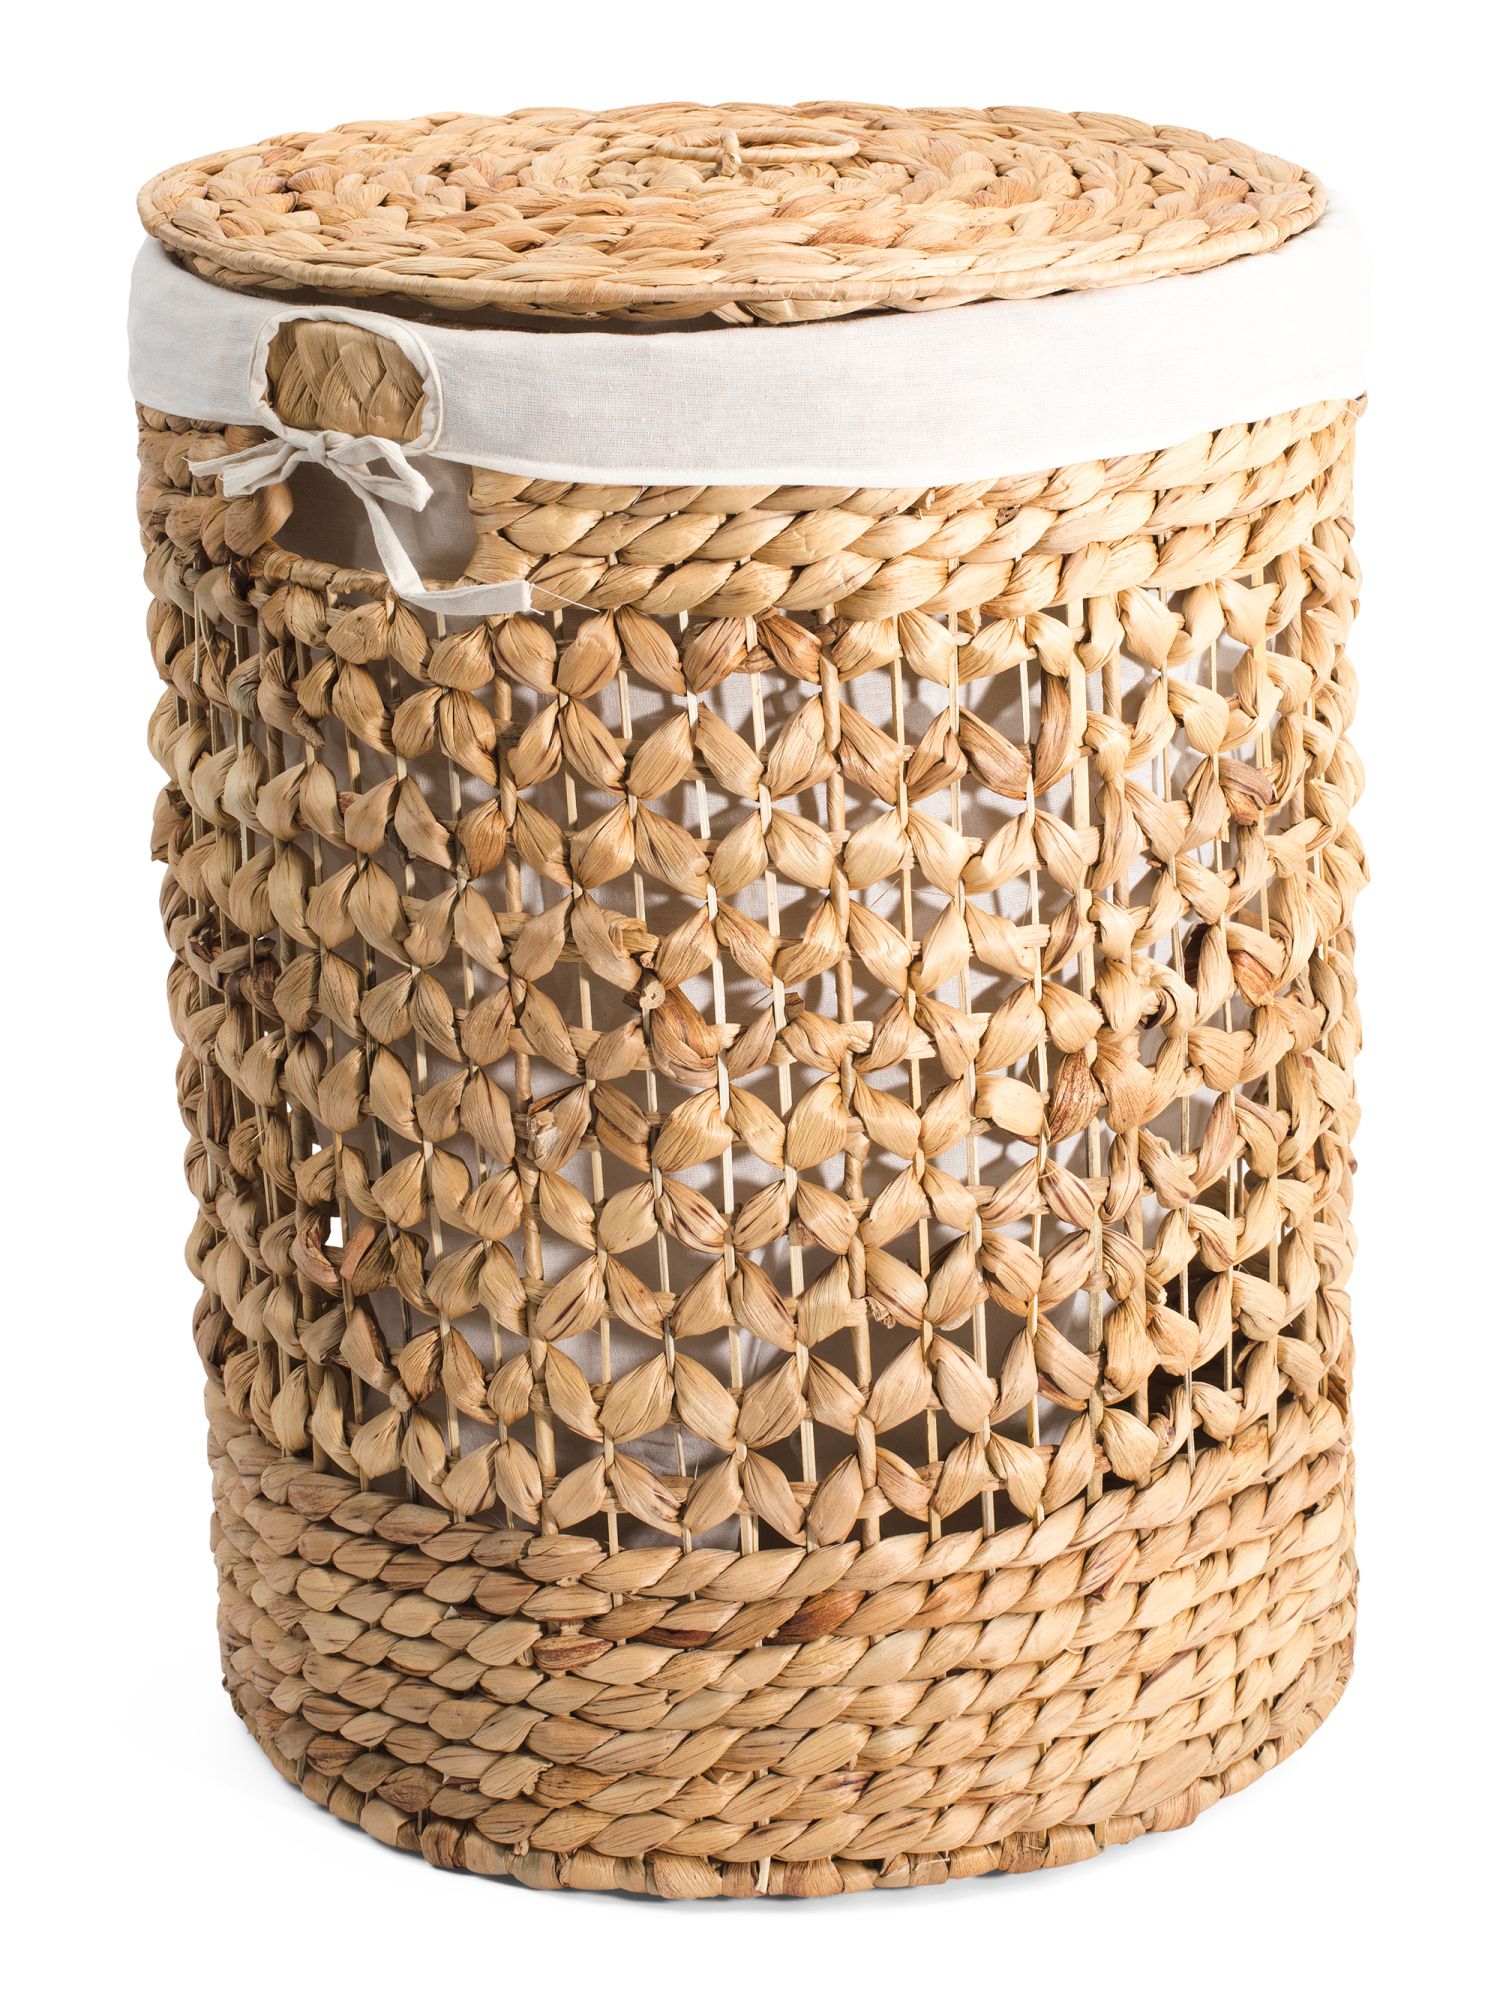 Woven Laundry Basket Collection | TJ Maxx